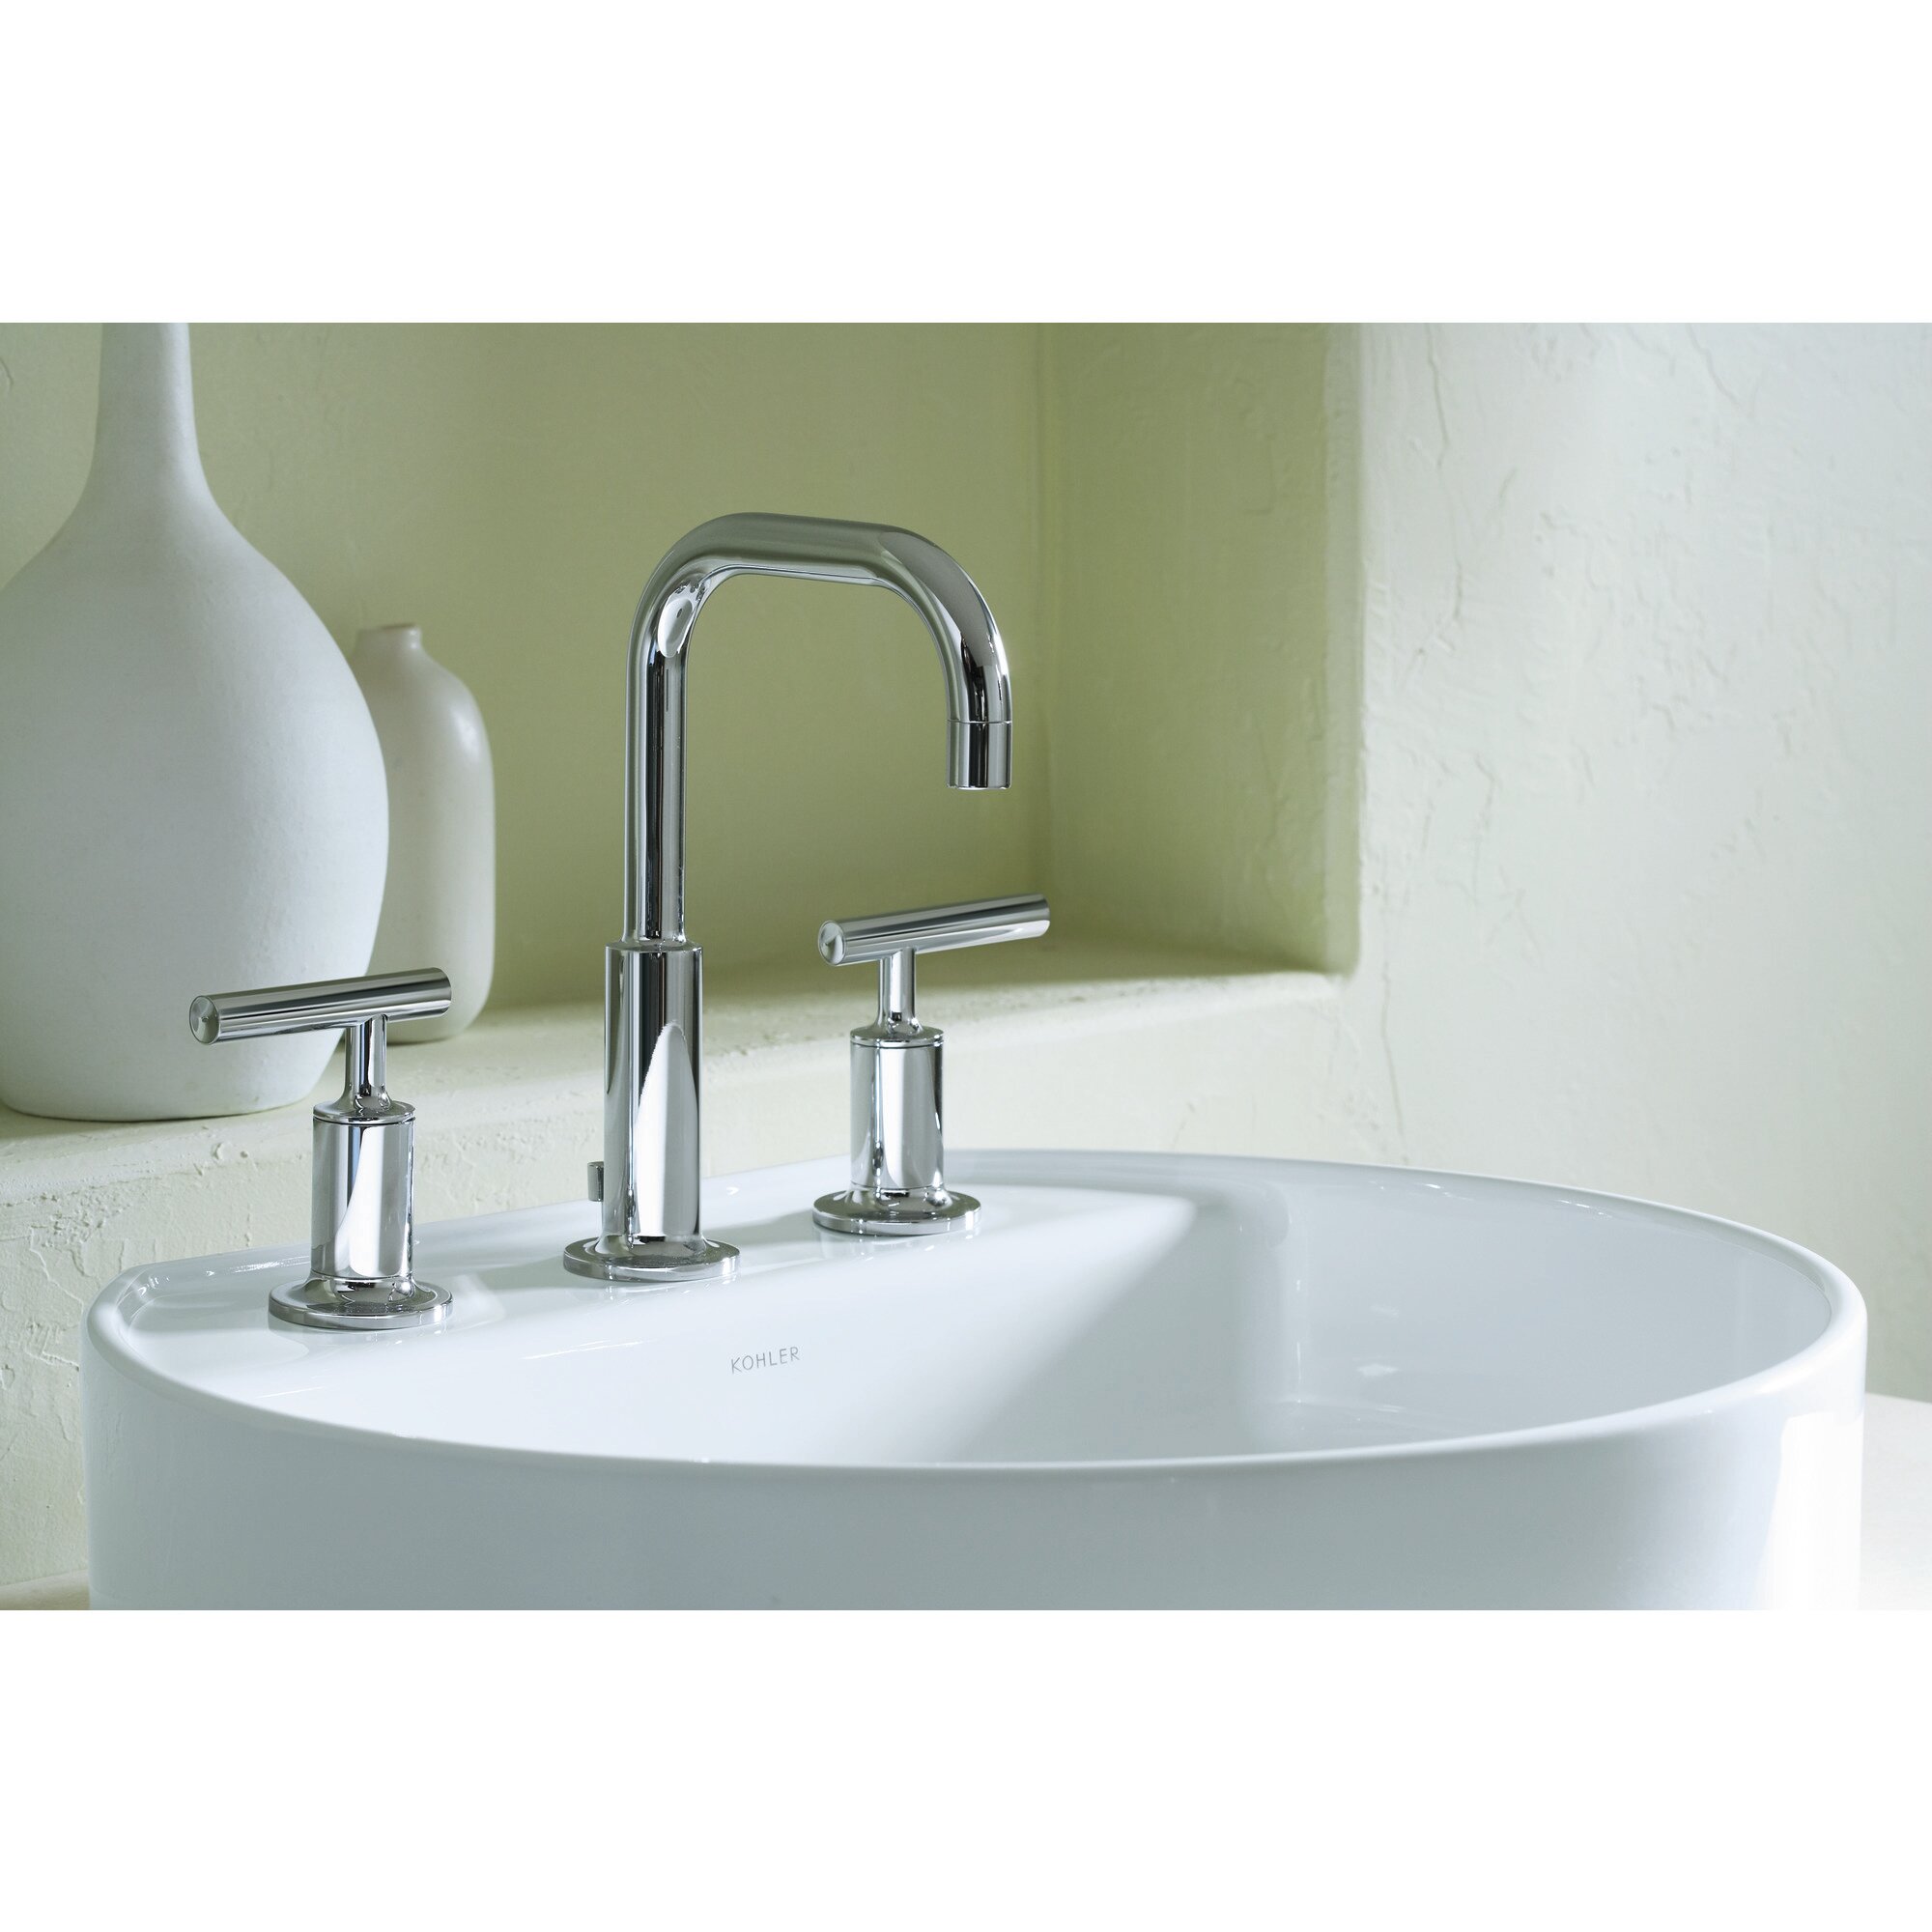 Kohler Purist Widespread Bathroom Faucet With Drain Assembly Reviews Wayfair